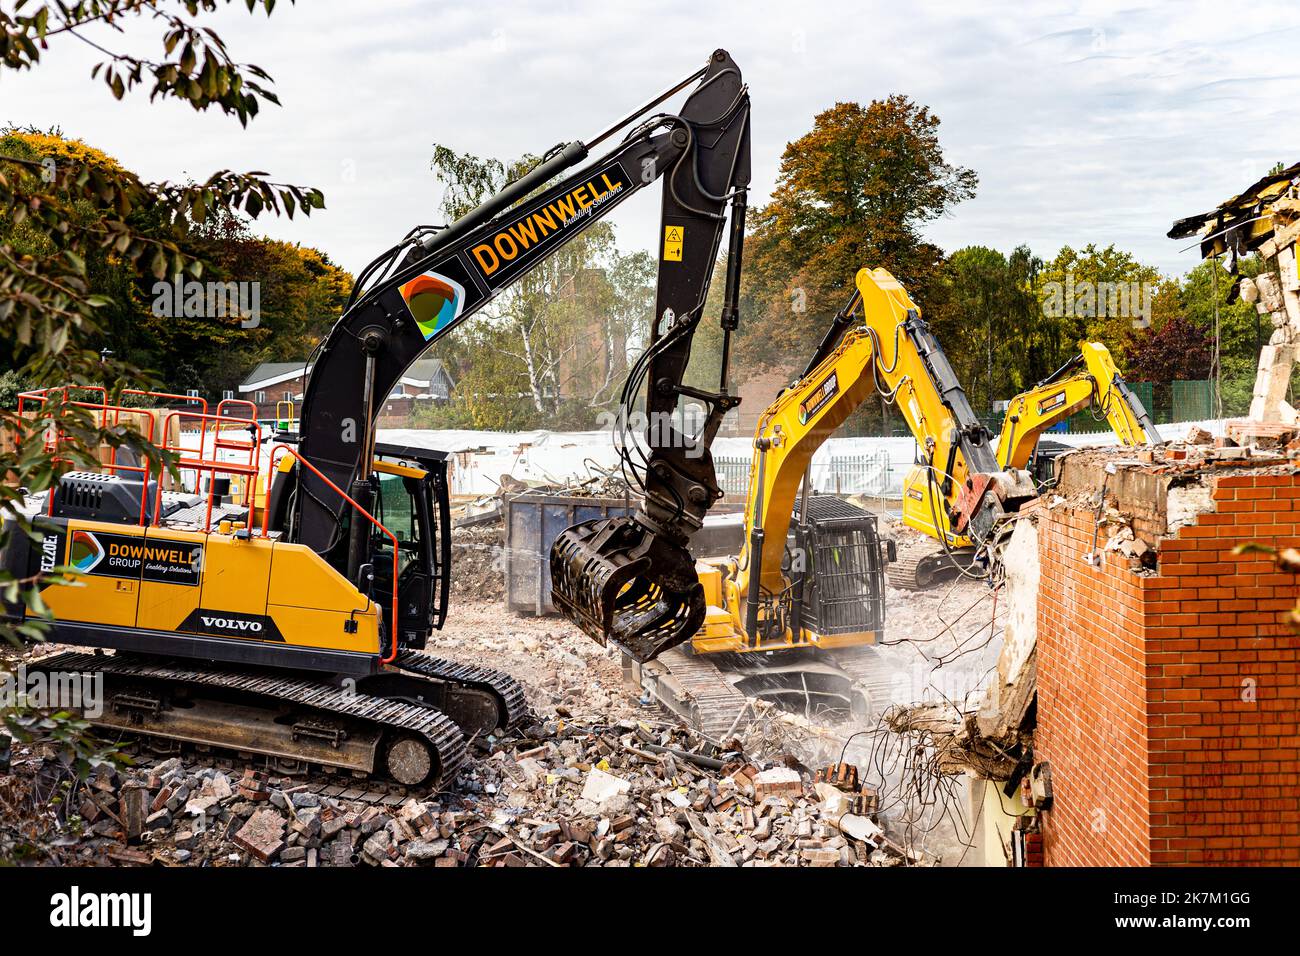 Three demolition Excavators working at a site in North London clearing the way for a large new housing scheme.Action shot removing bricks and rubble. Stock Photo